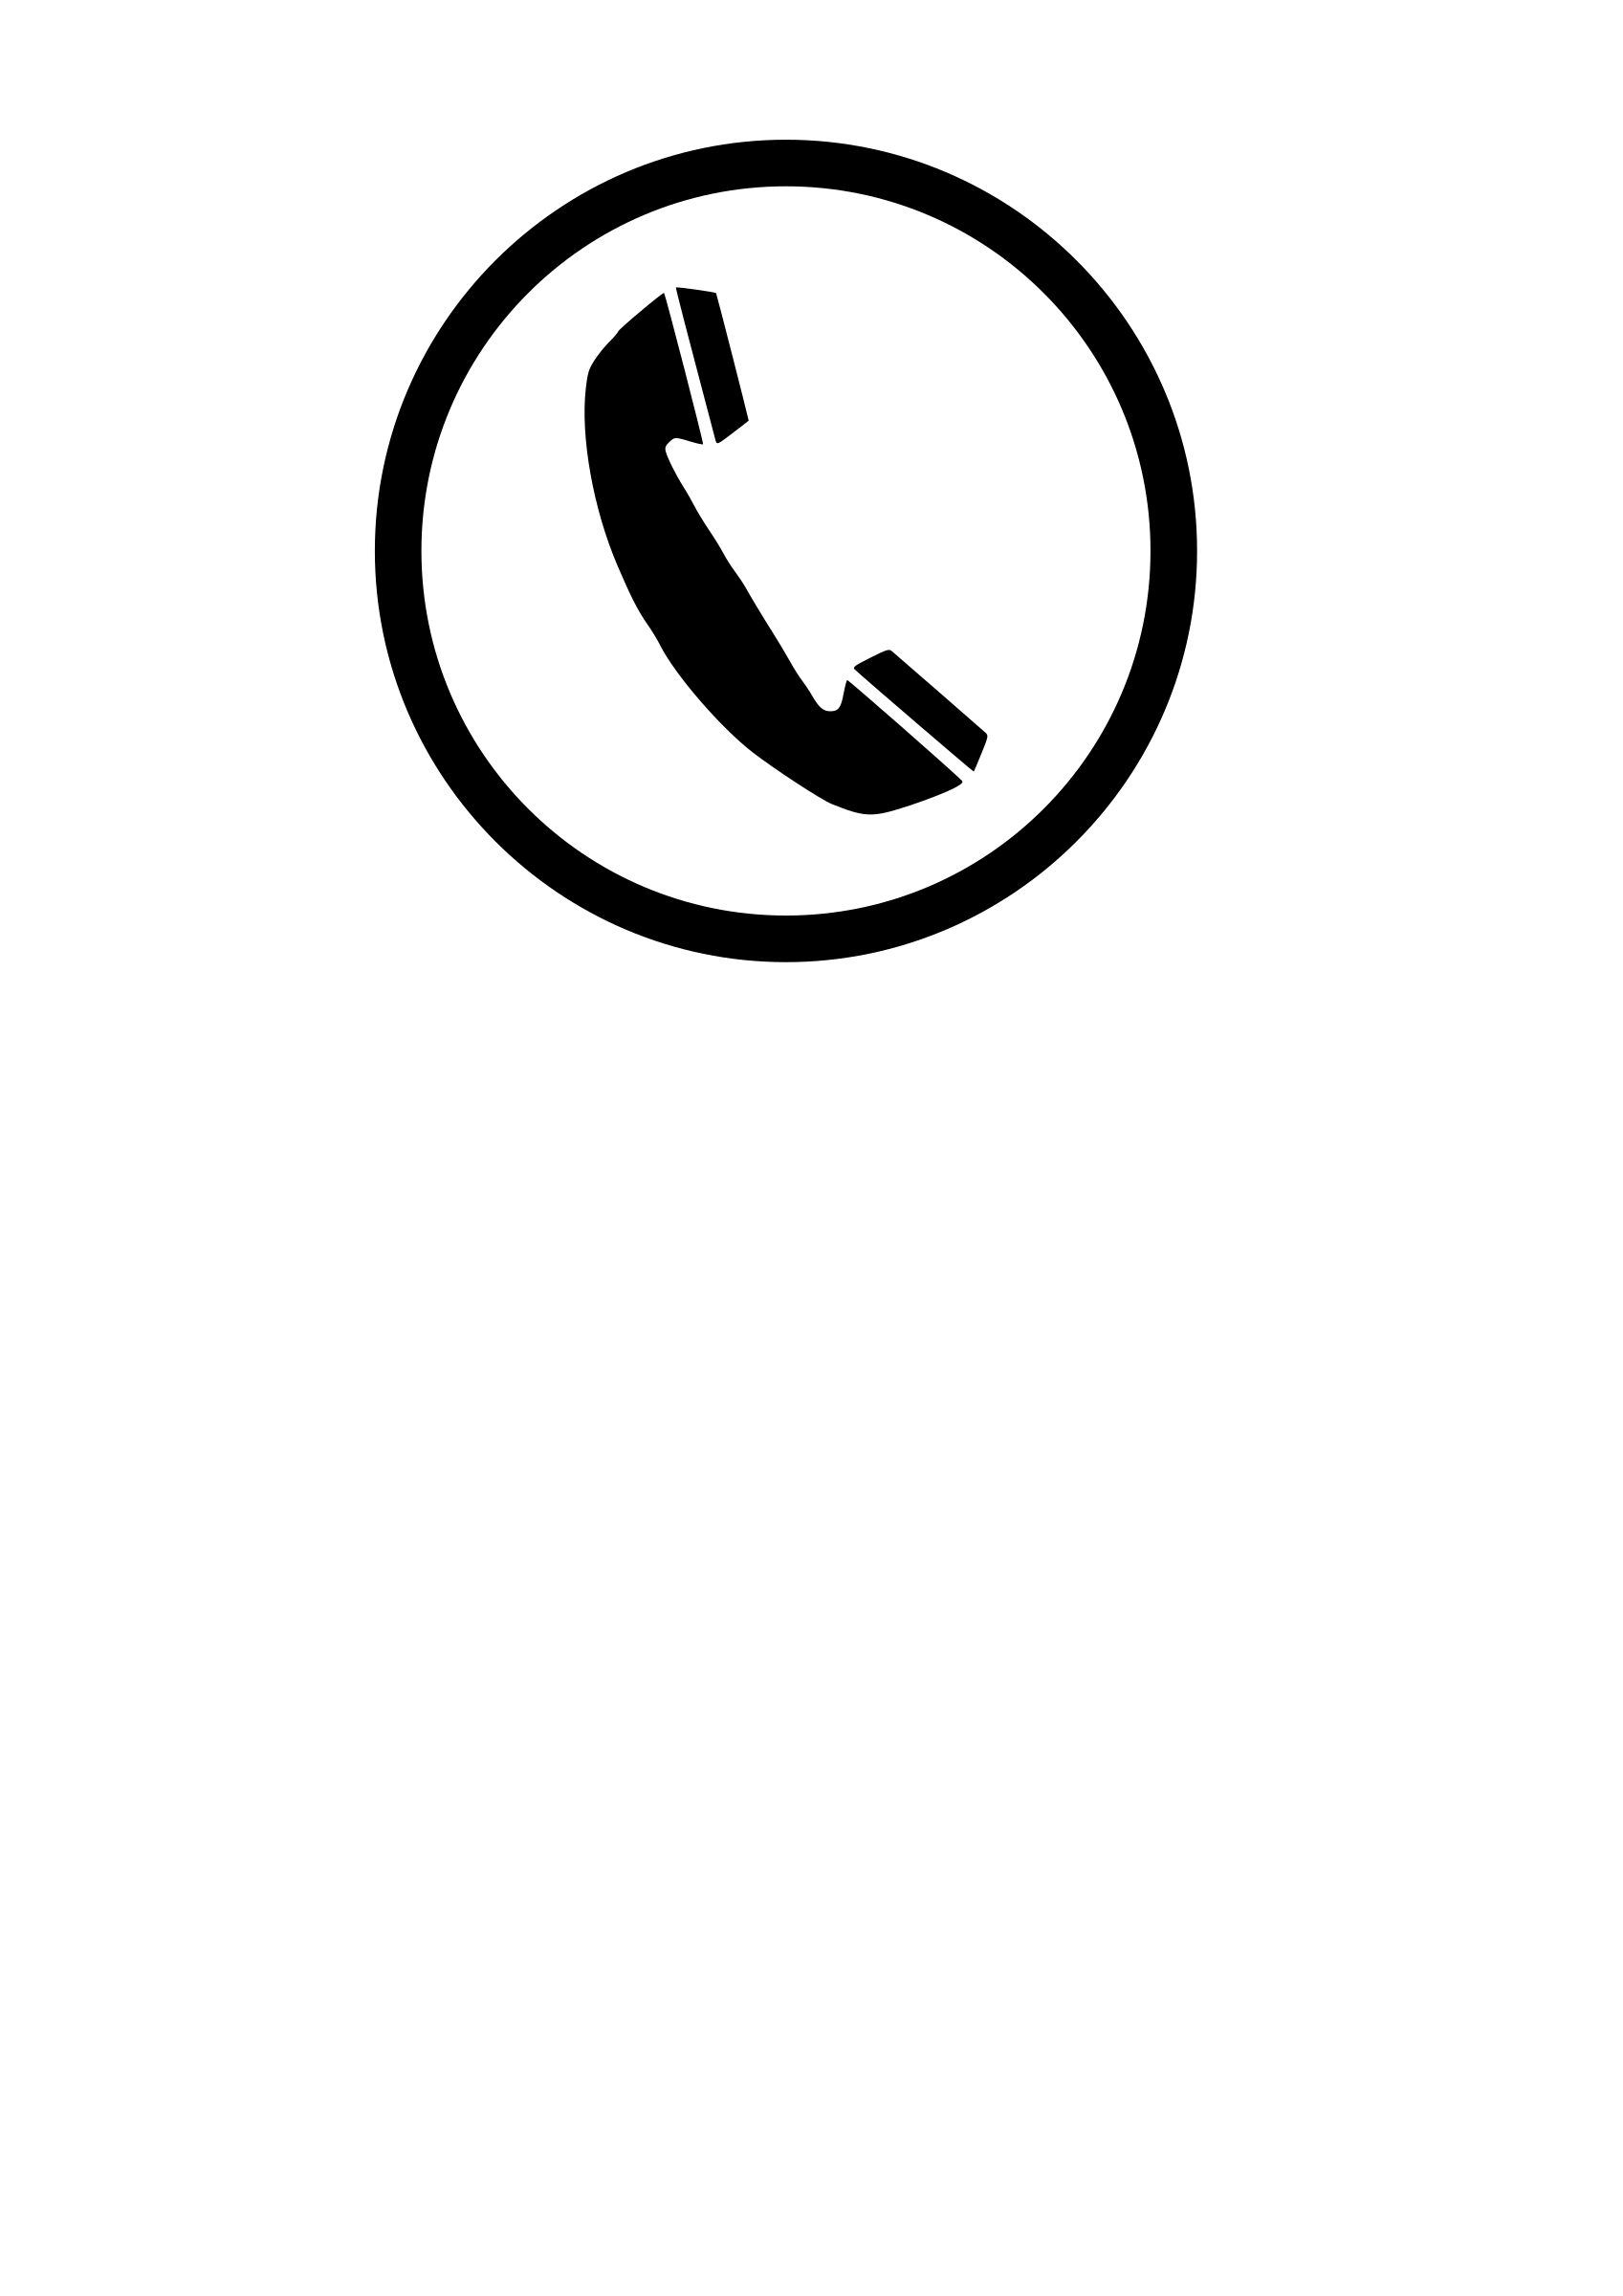 Telephone clipart small.